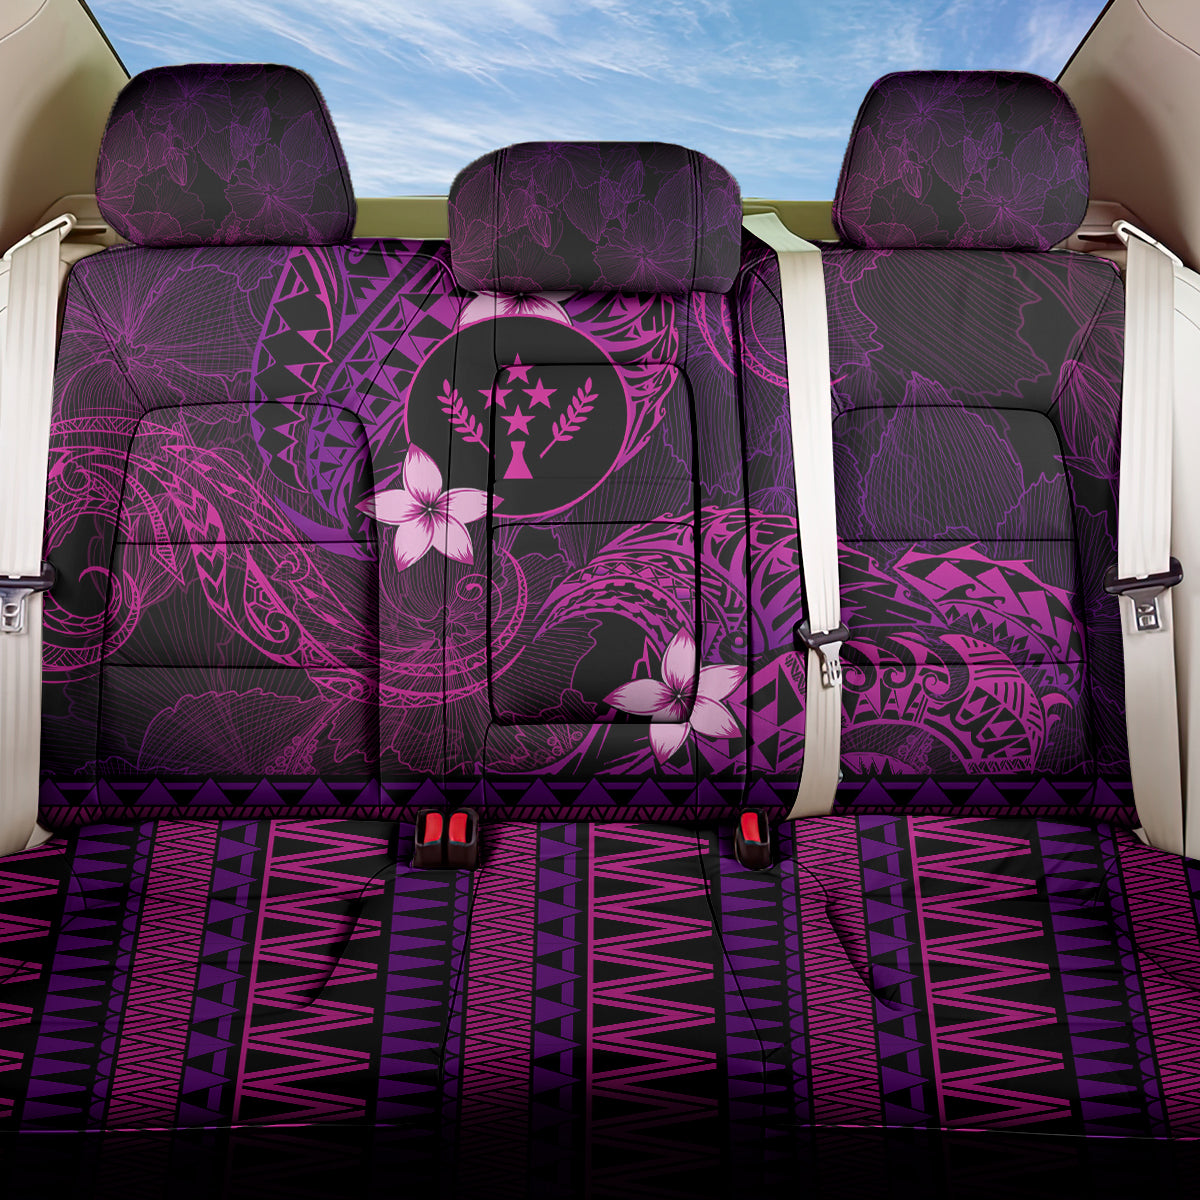 FSM Kosrae State Back Car Seat Cover Tribal Pattern Pink Version LT01 One Size Pink - Polynesian Pride